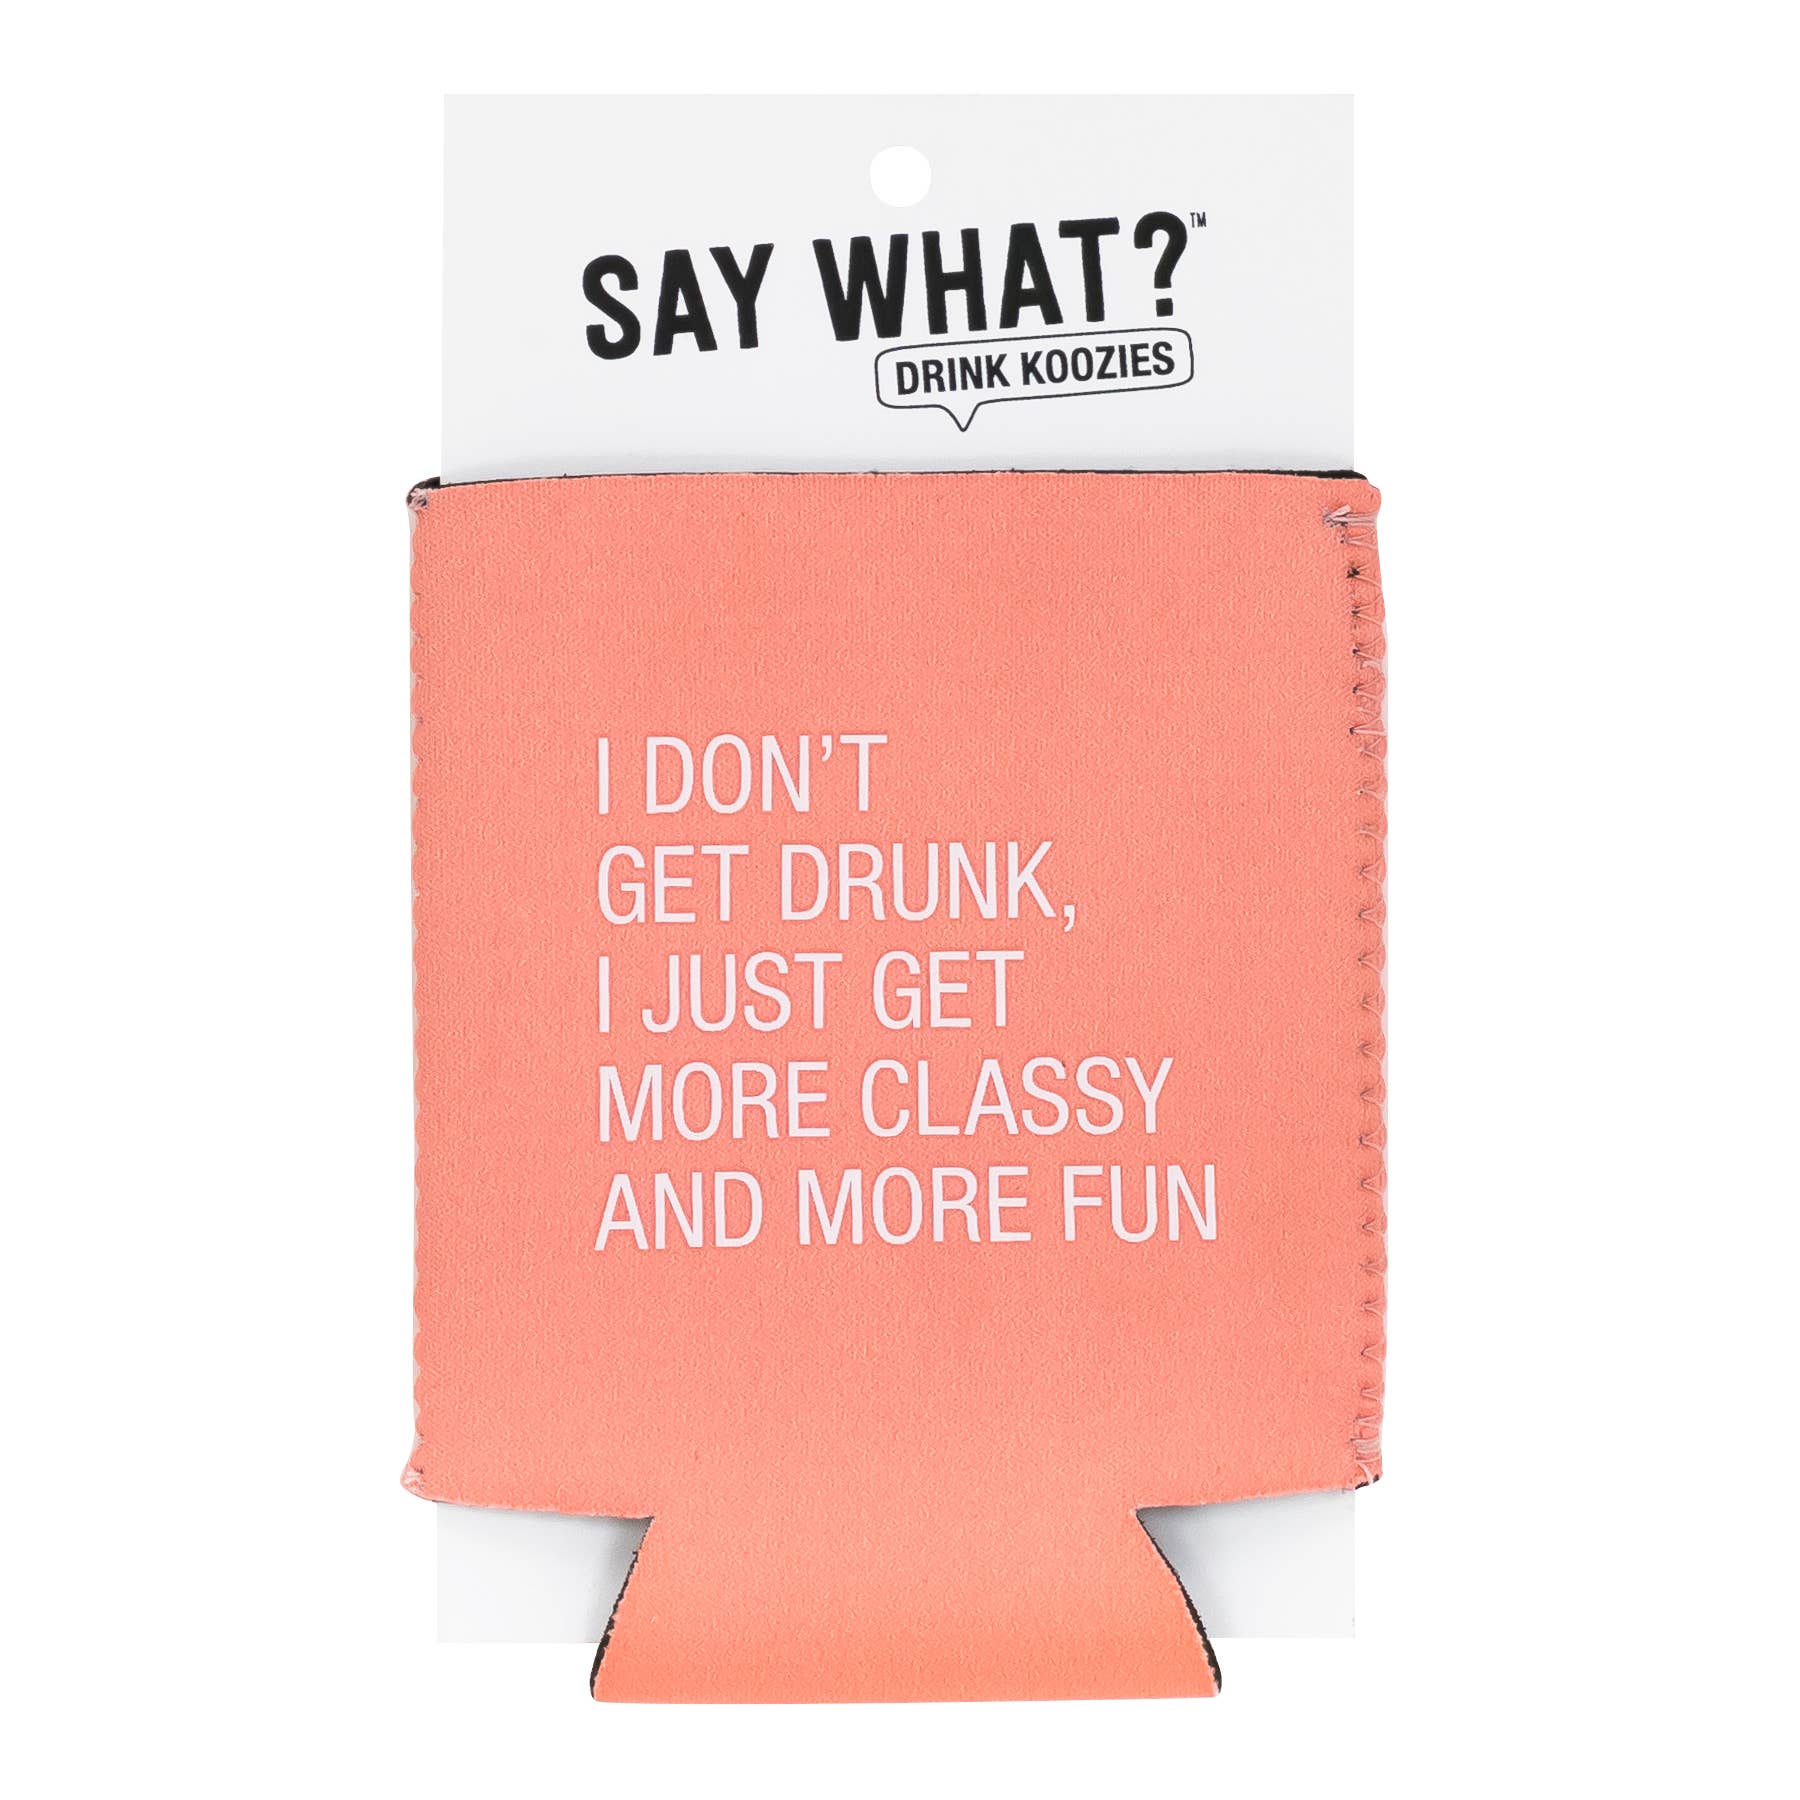 About Face Designs Bad and Boozy On Pink 4 x 4.75 Neoprene Beverage Sleeve 